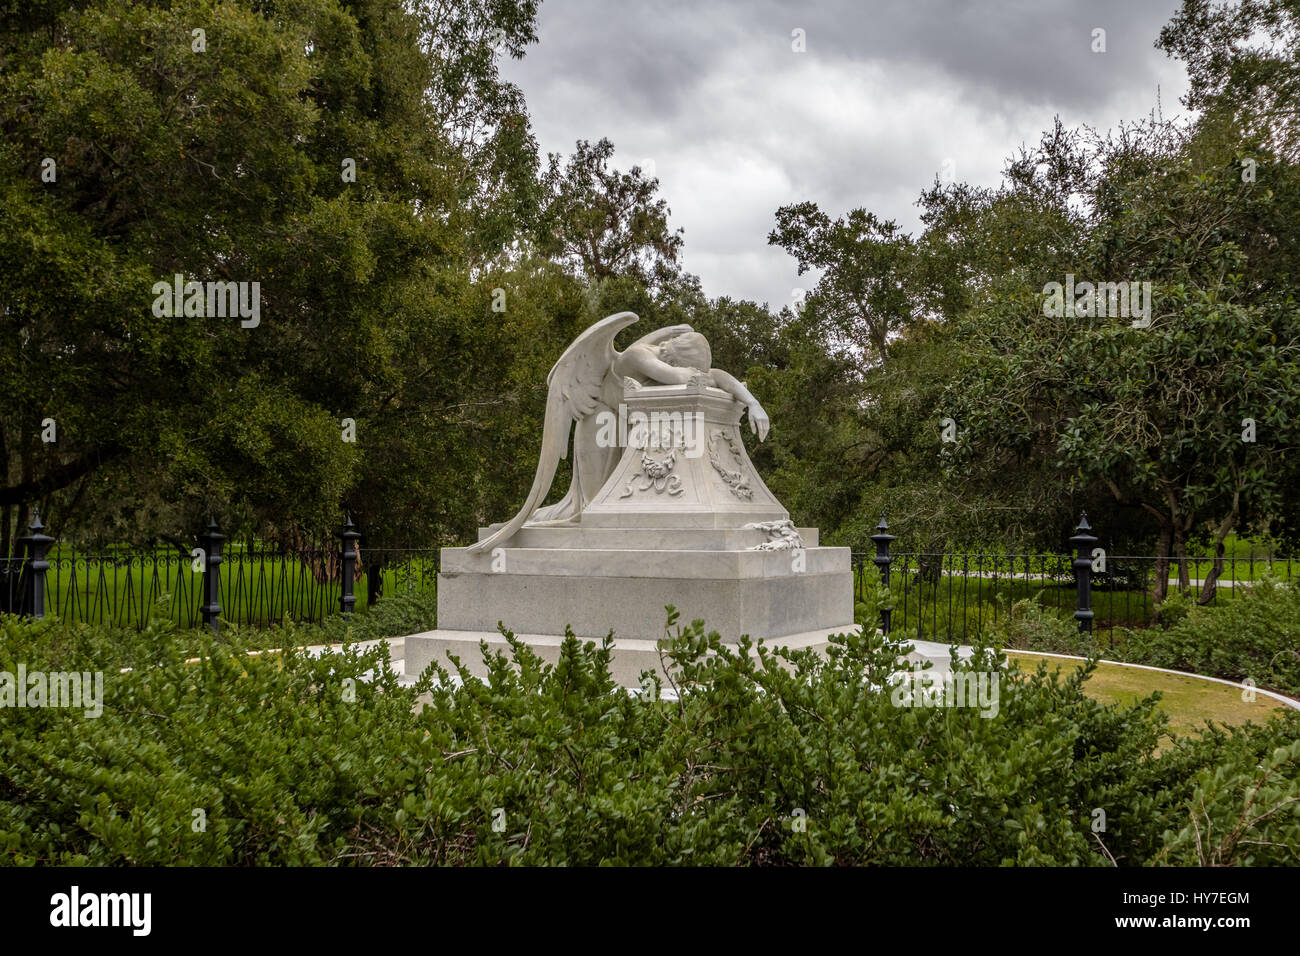 The angel of grief statue at Stanford University Campus - Palo Alto, California, USA Stock Photo